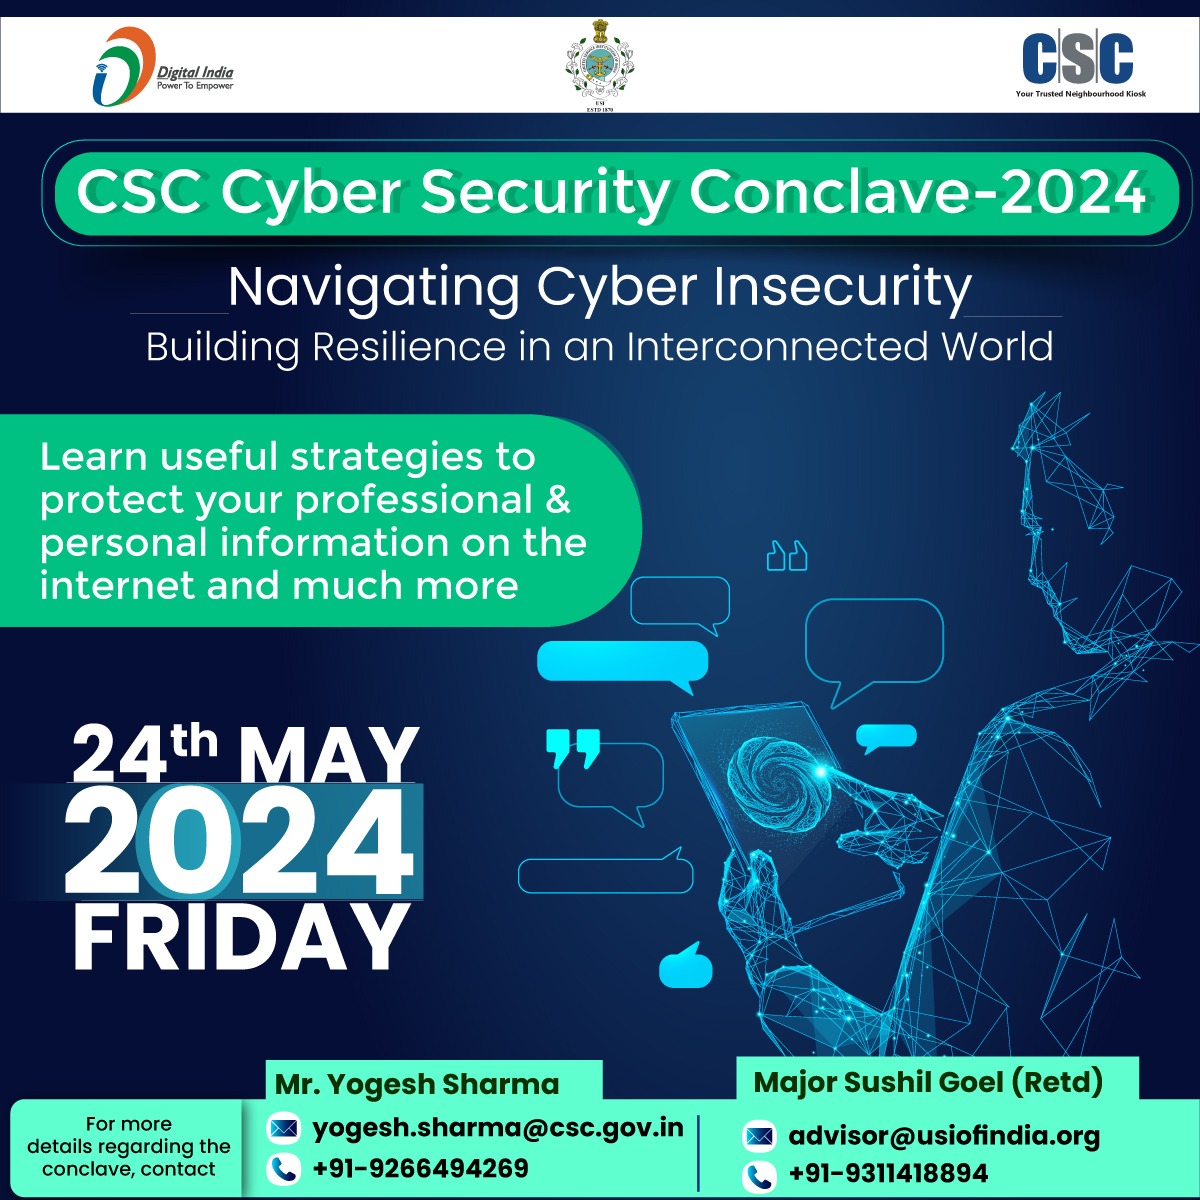 Save The Date!

CSC #CyberSecurity Conclave 2024...

Navigating Cyber Insecurity: Building Resilience in an Interconnected World.

Learn about the emerging cyber threats, trends, and solutions in different verticals...

Stay tuned!

#CSC #CSCCyberSecurityConclave2024 #StayTuned